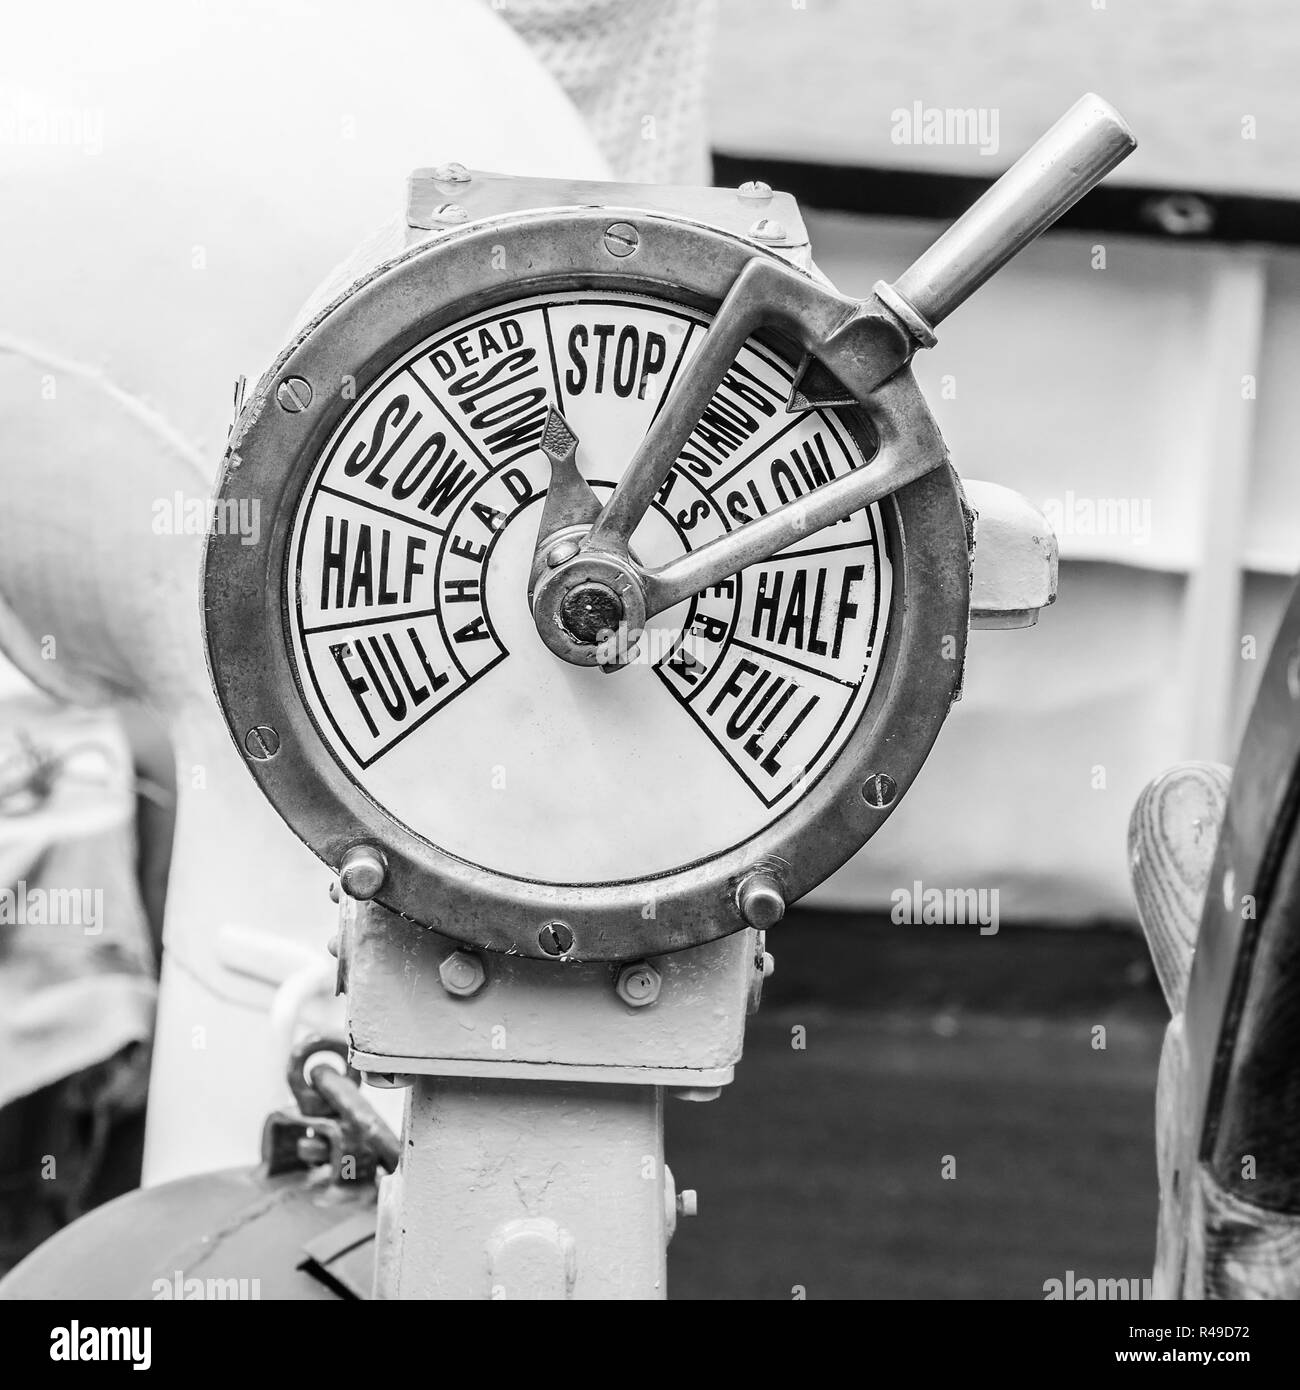 engine room telegraph,  old steamship Stock Photo